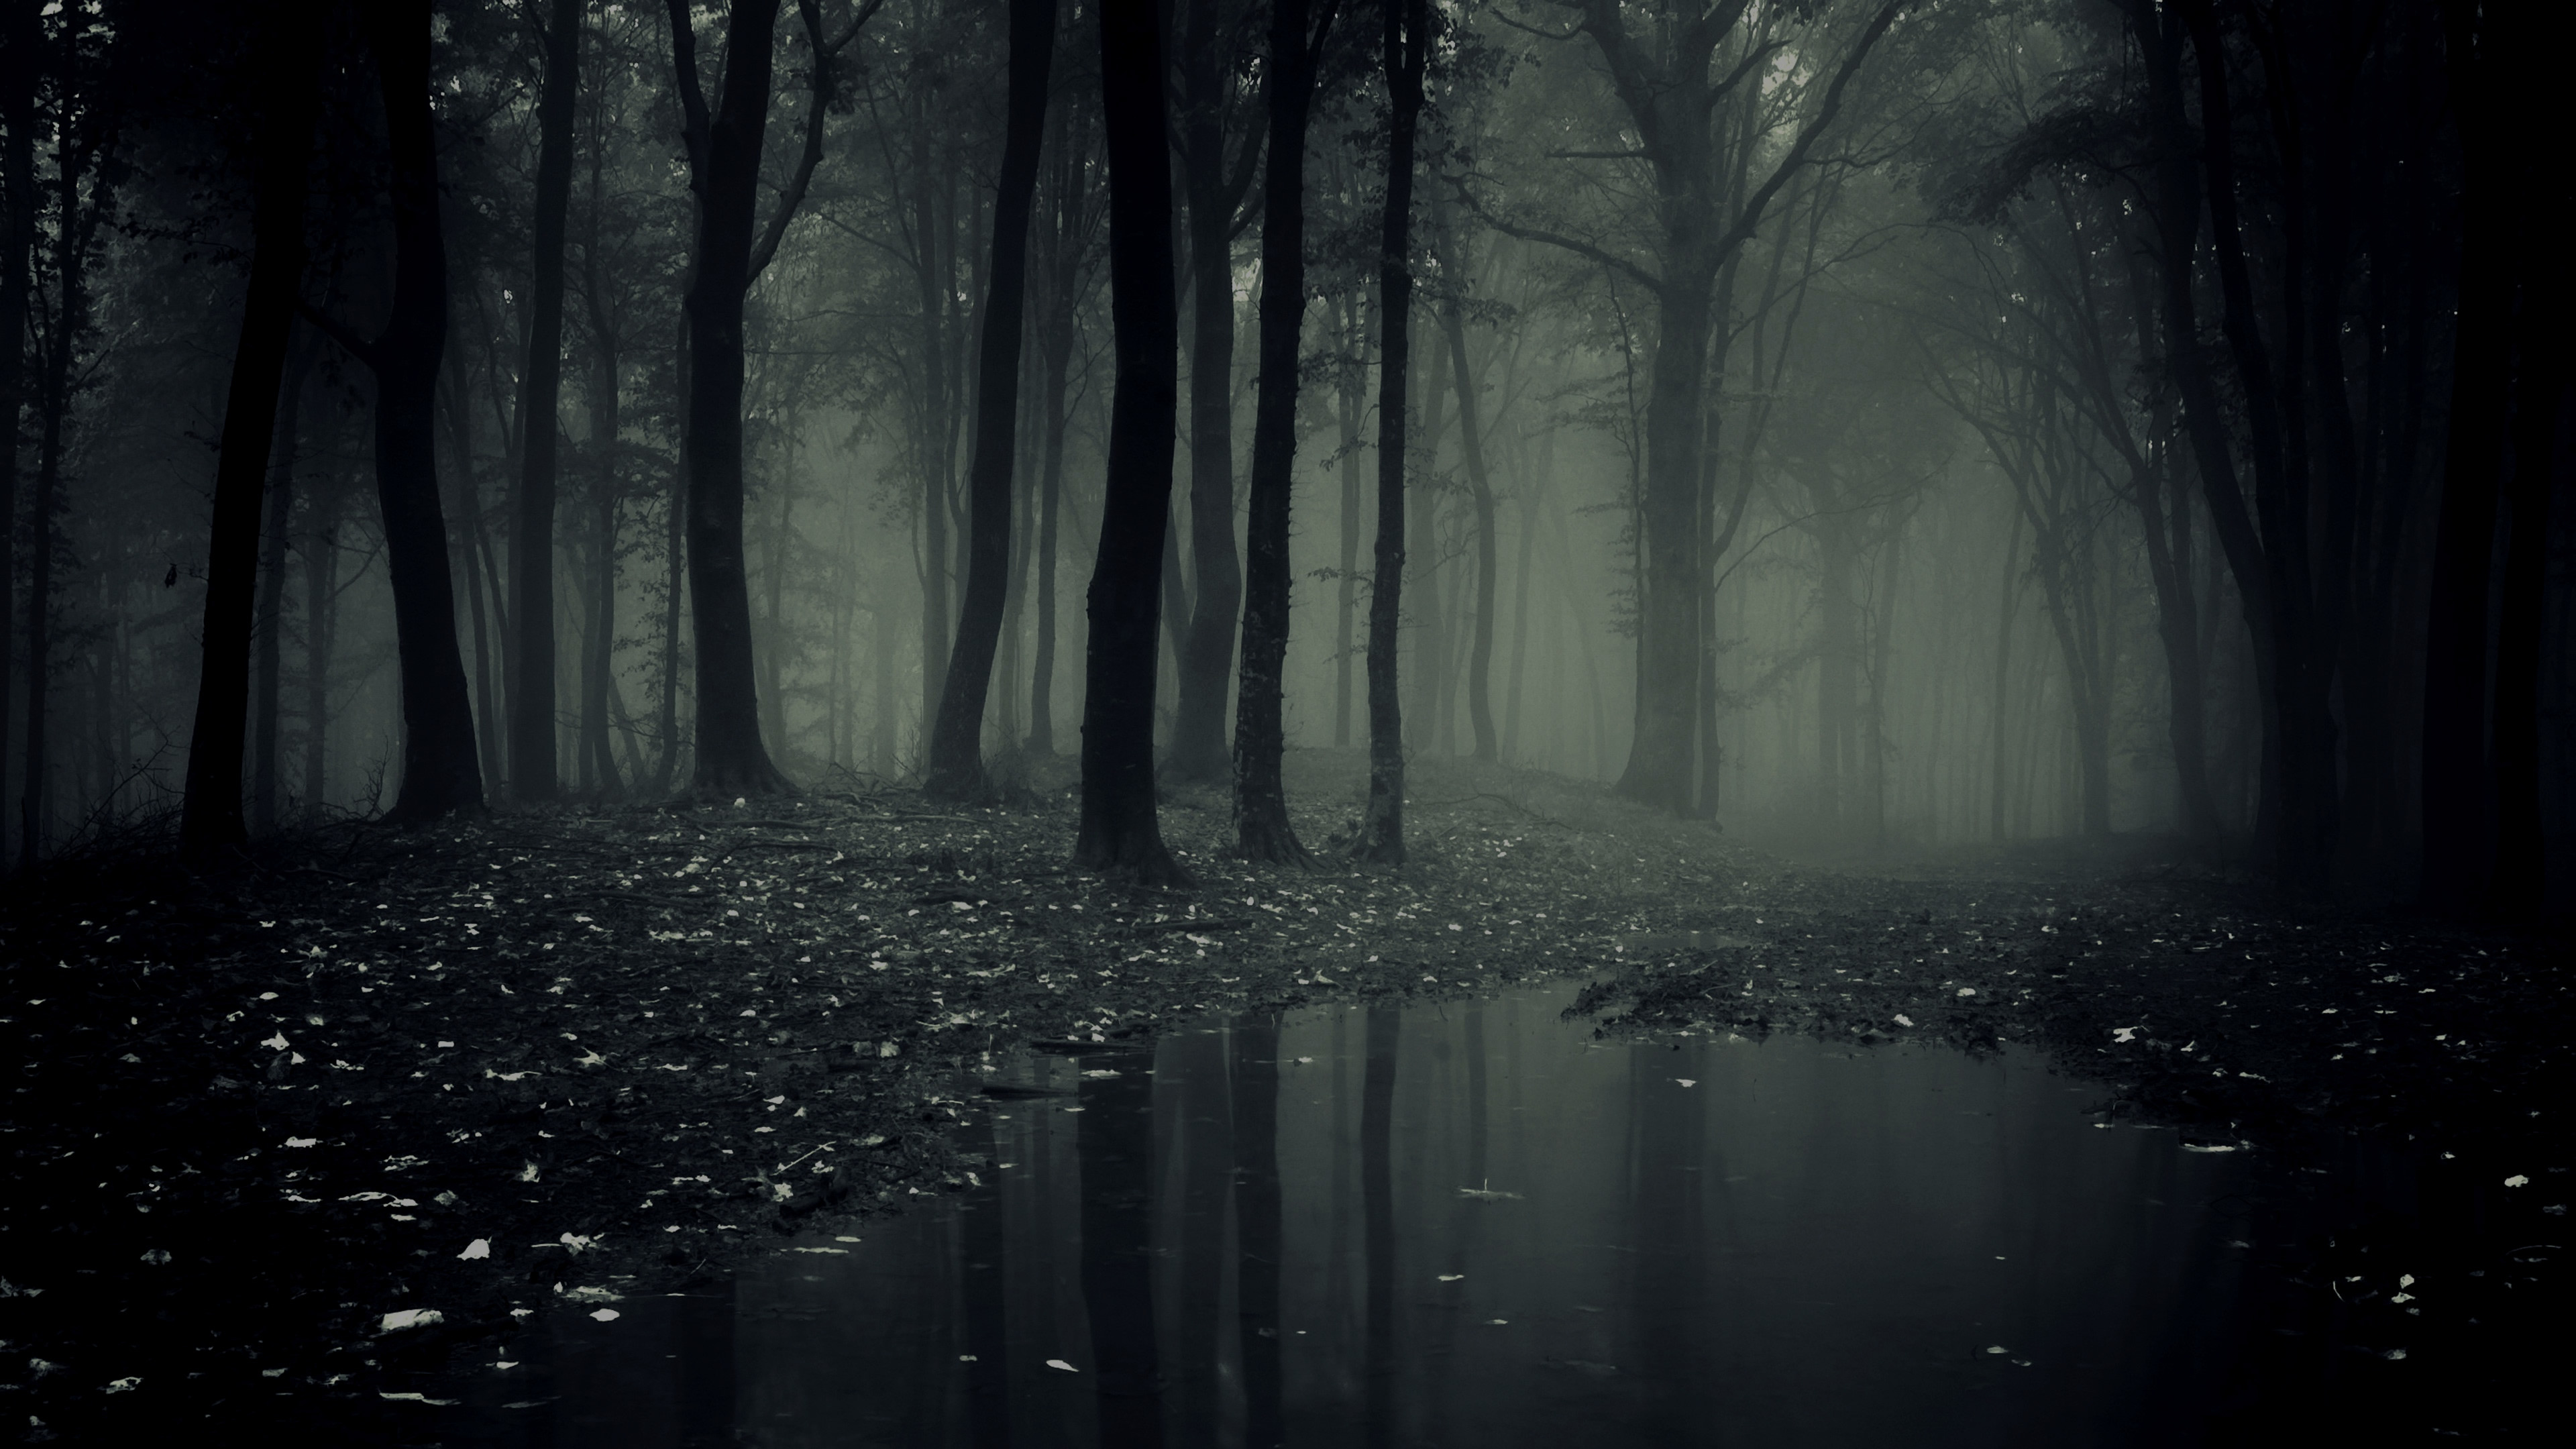 A mocsár - Page 4 Full-Hd-Of-Scary-Forest-Wallpaper-Creepy-Images-Mobile